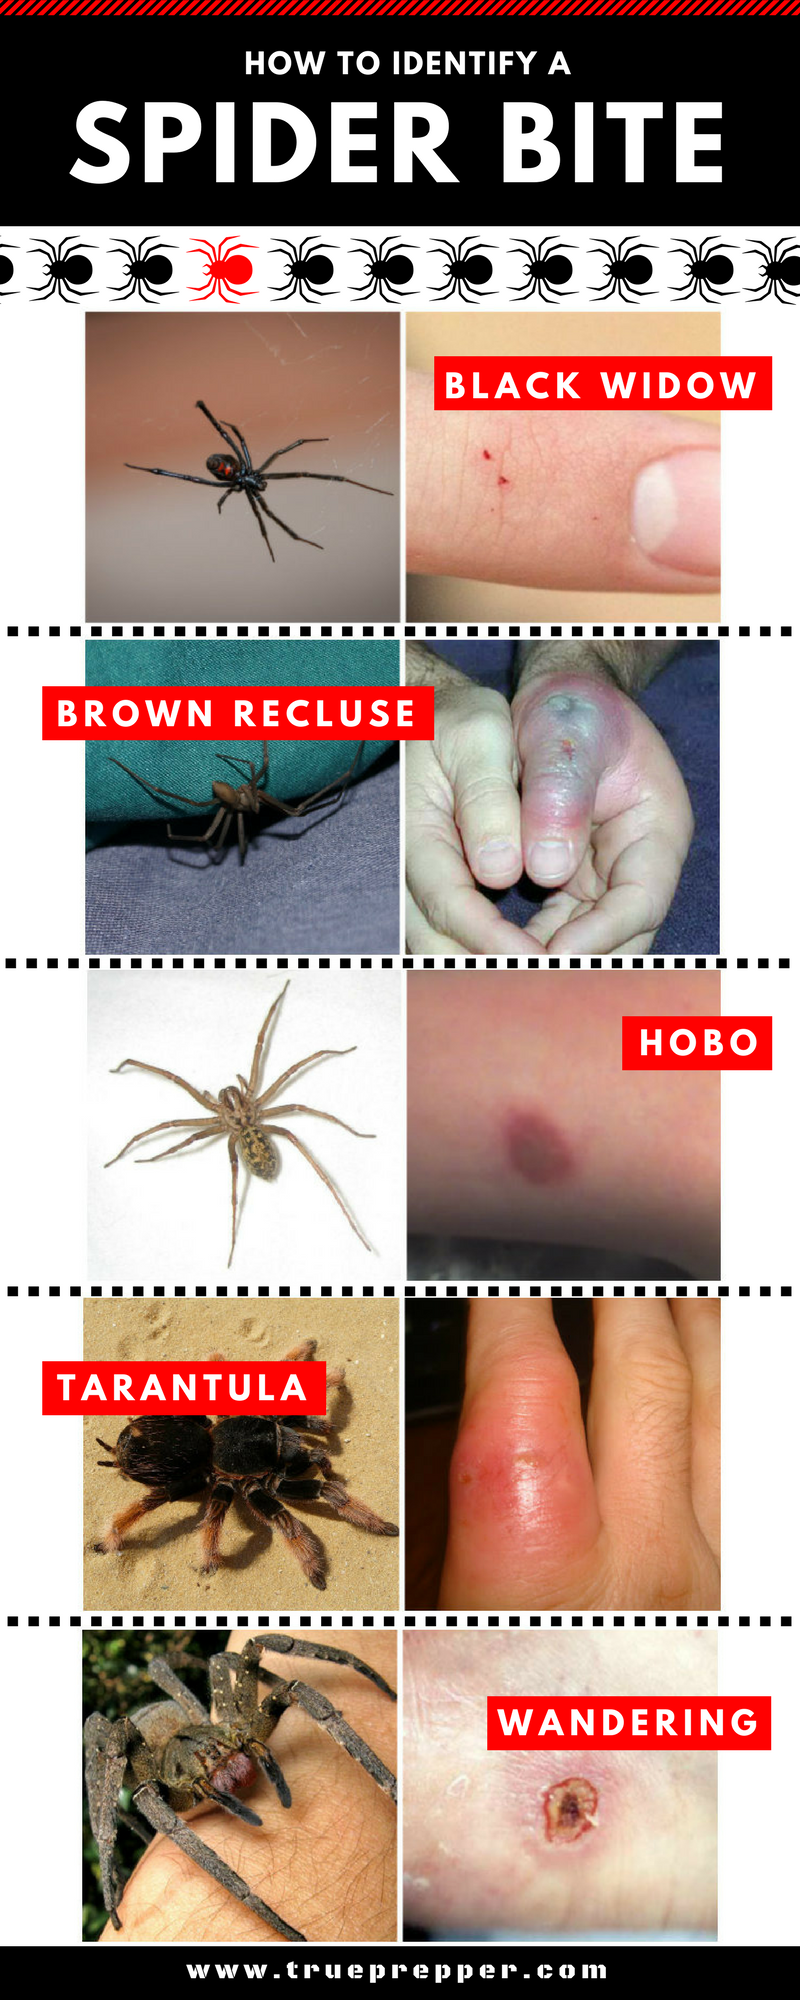 How to Identify a Spider Bite Infographic